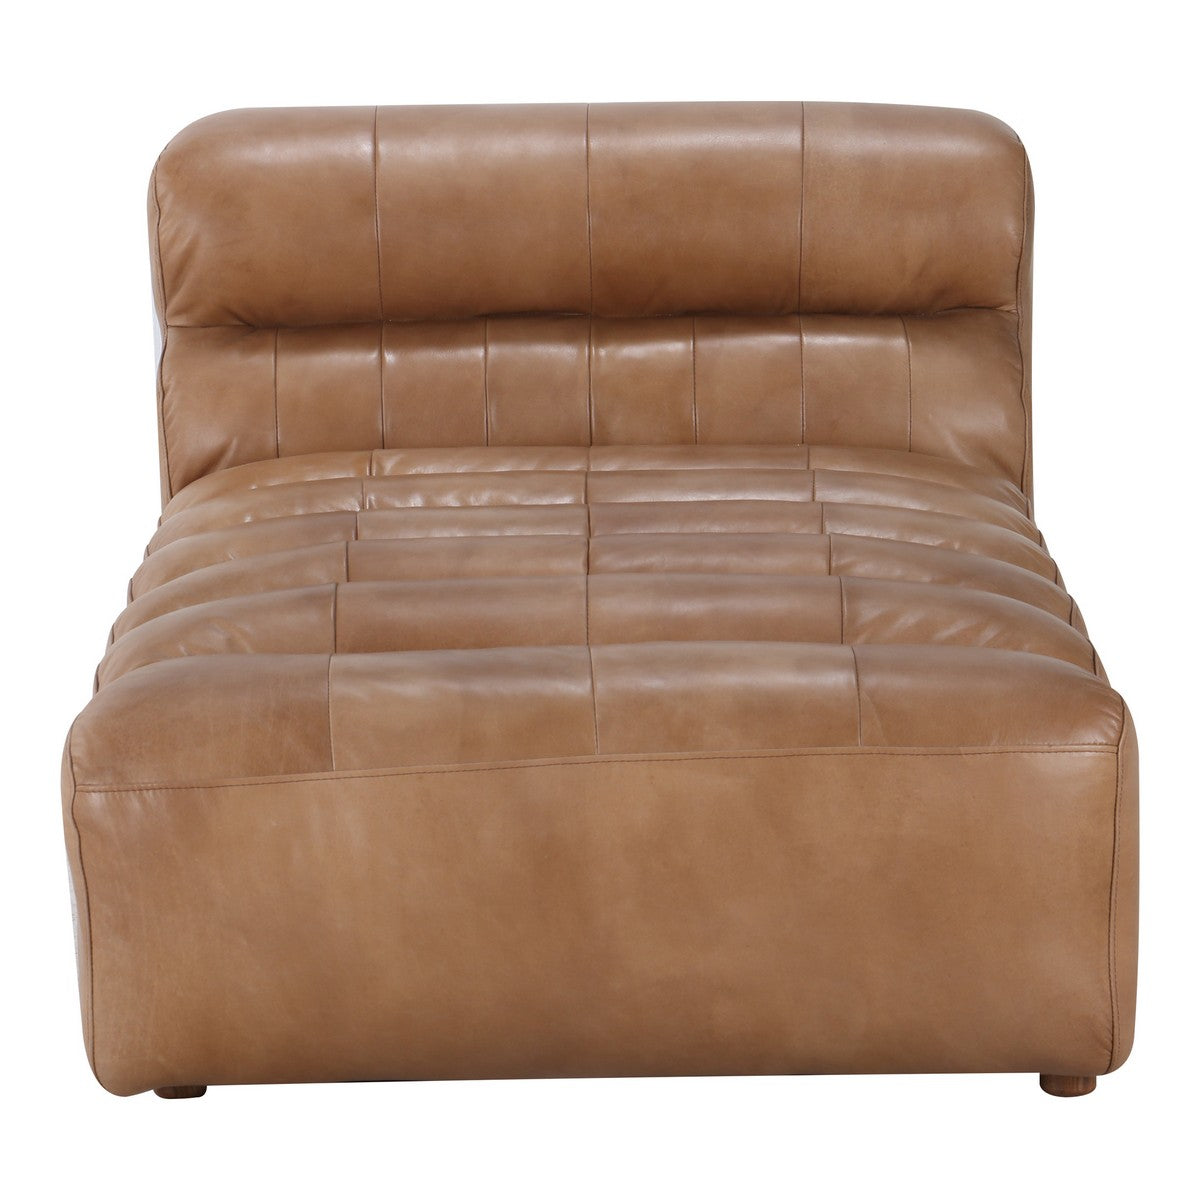 Moe's Home Collection Ramsay Leather Chaise Tan - QN-1010-40 - Moe's Home Collection - chaise lounges - Minimal And Modern - 1